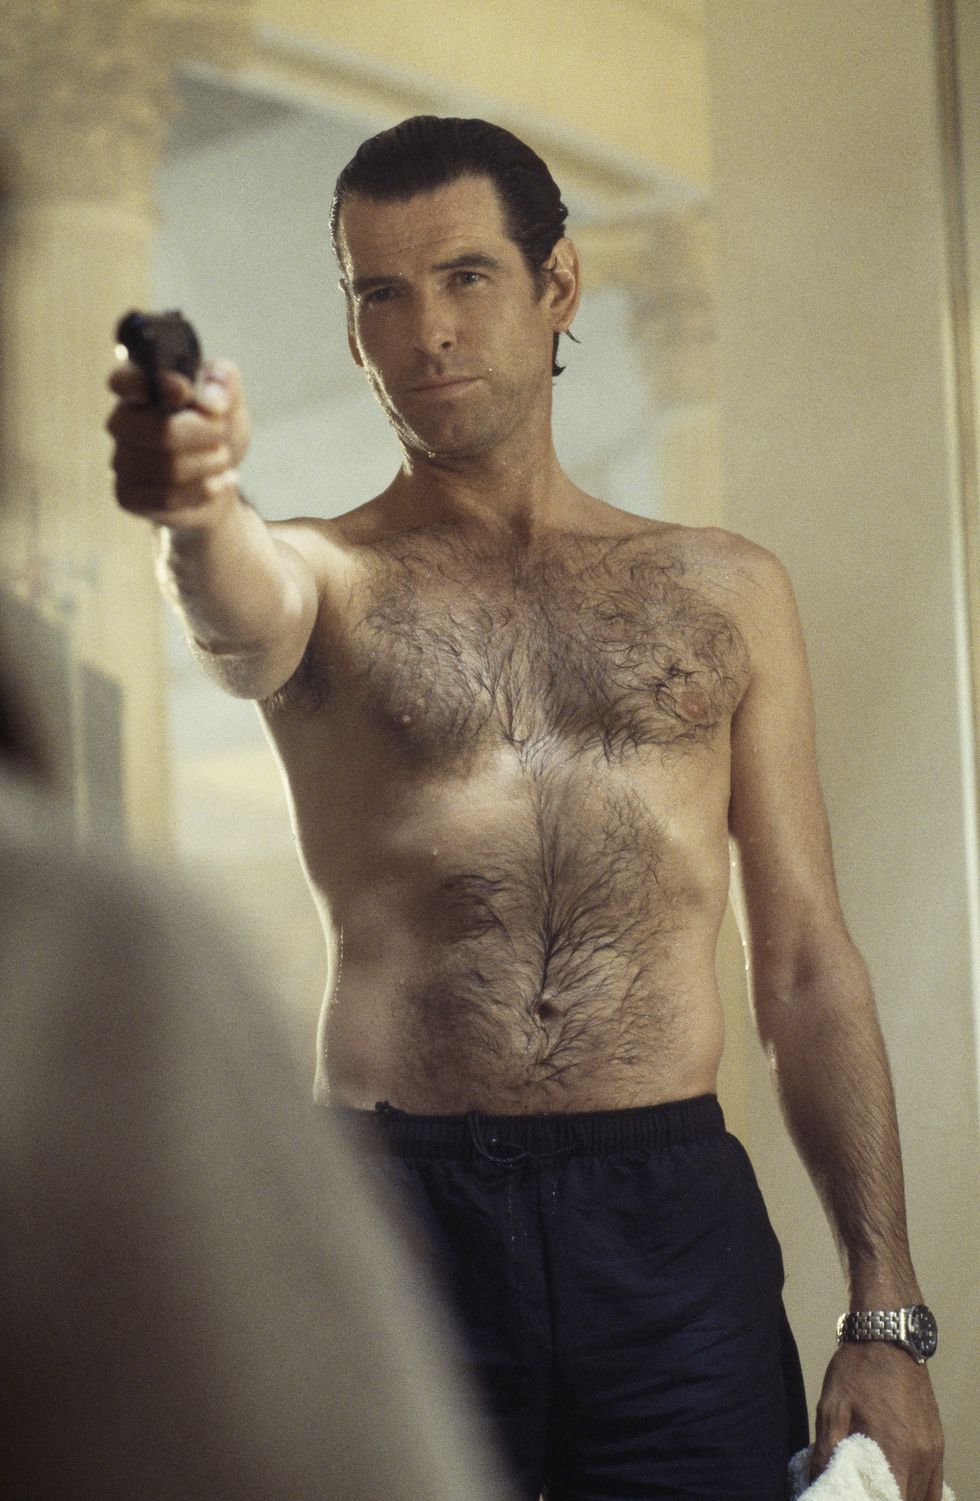 irish actor pierce brosnan as 007 in the james bond film 'goldeneye', 1995 here he confronts an assailant in a sauna photo by keith hamsheregetty images